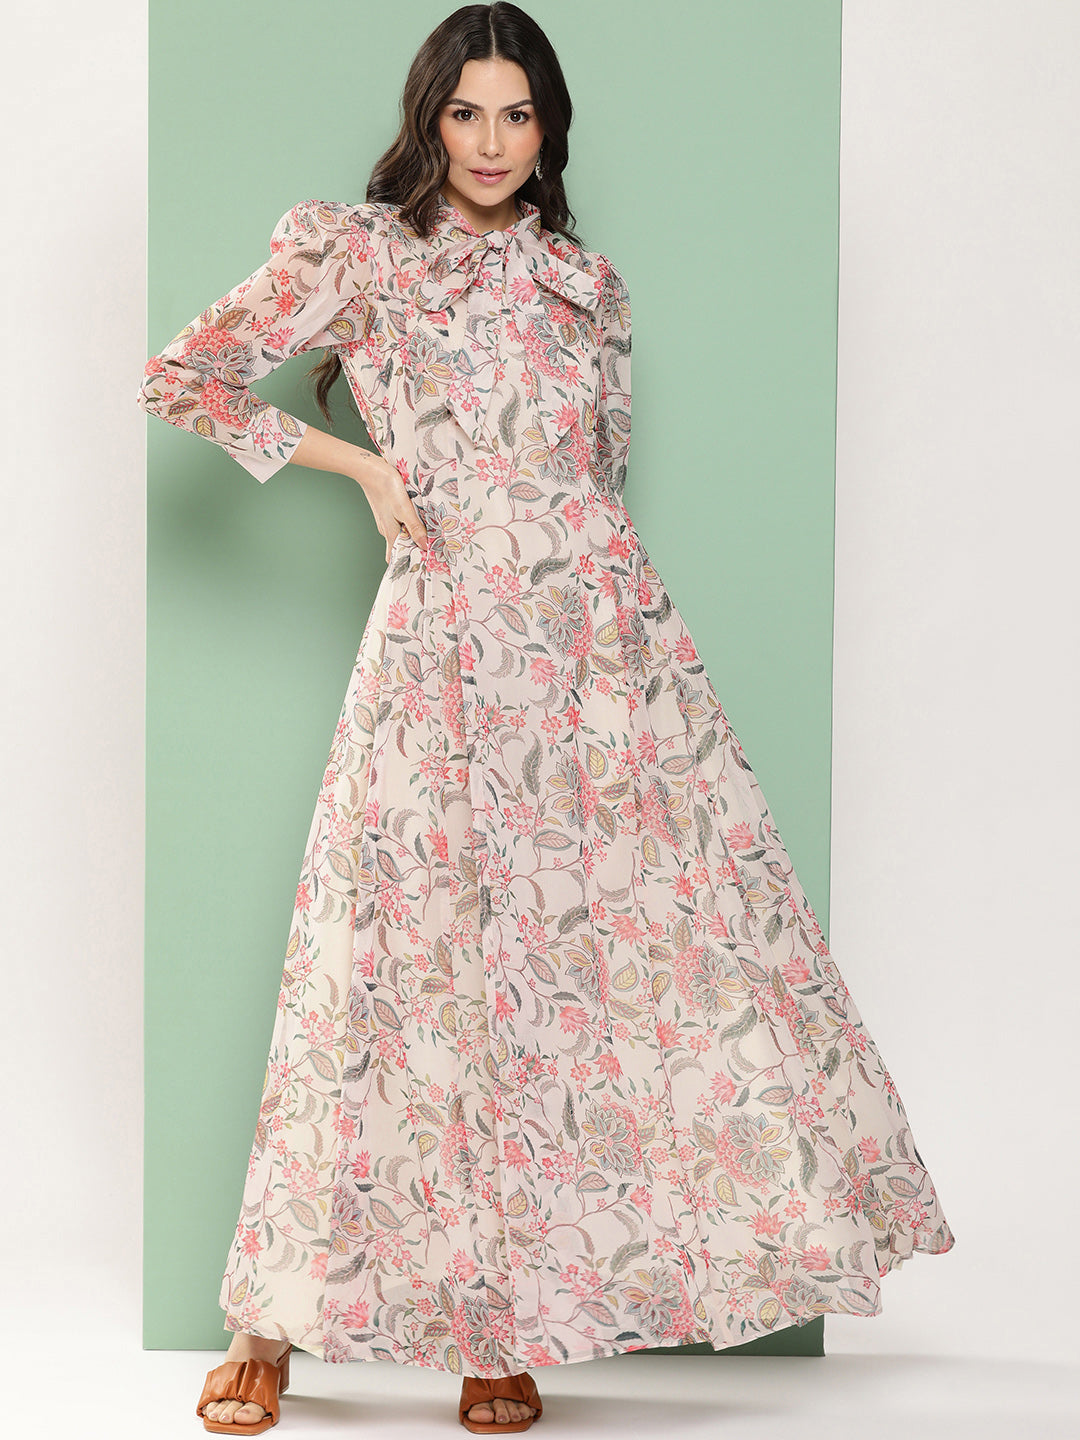 Bhama Couture Off-White Printed Long Dress With Tie-Up Neck